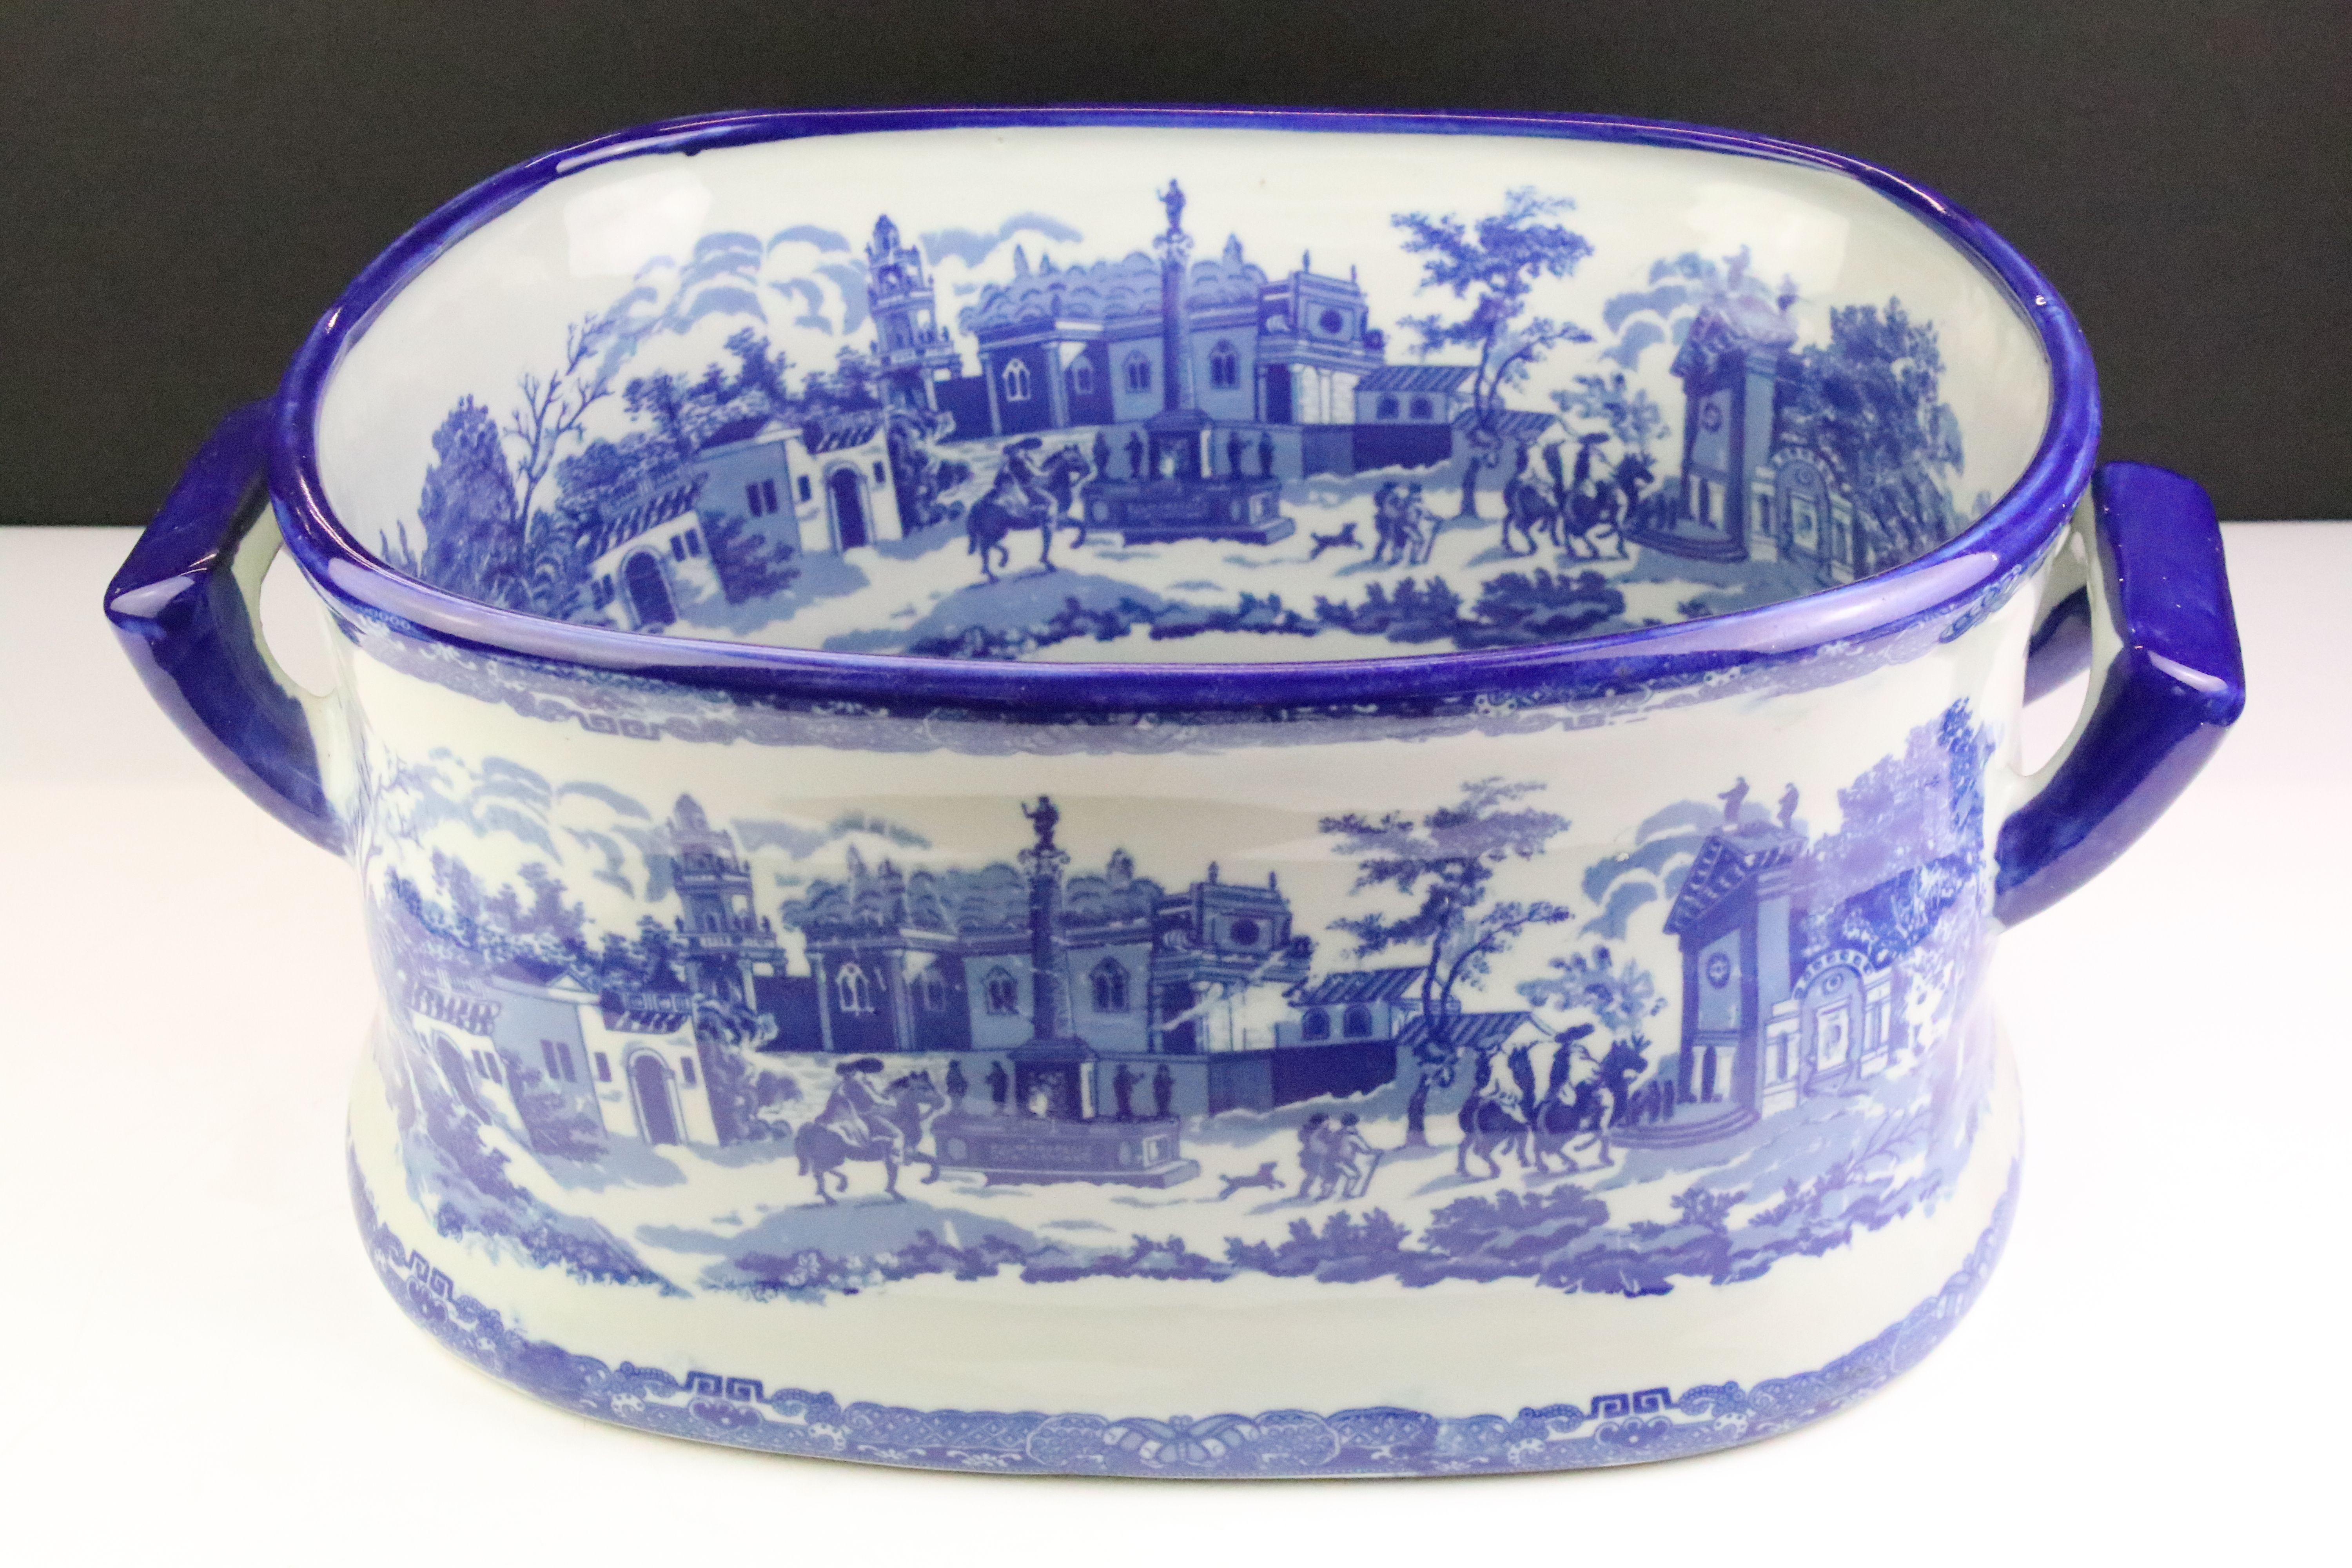 Large 19th century style Blue and White Ironstone Twin Handled Footbath, 47cm long x 21cm high